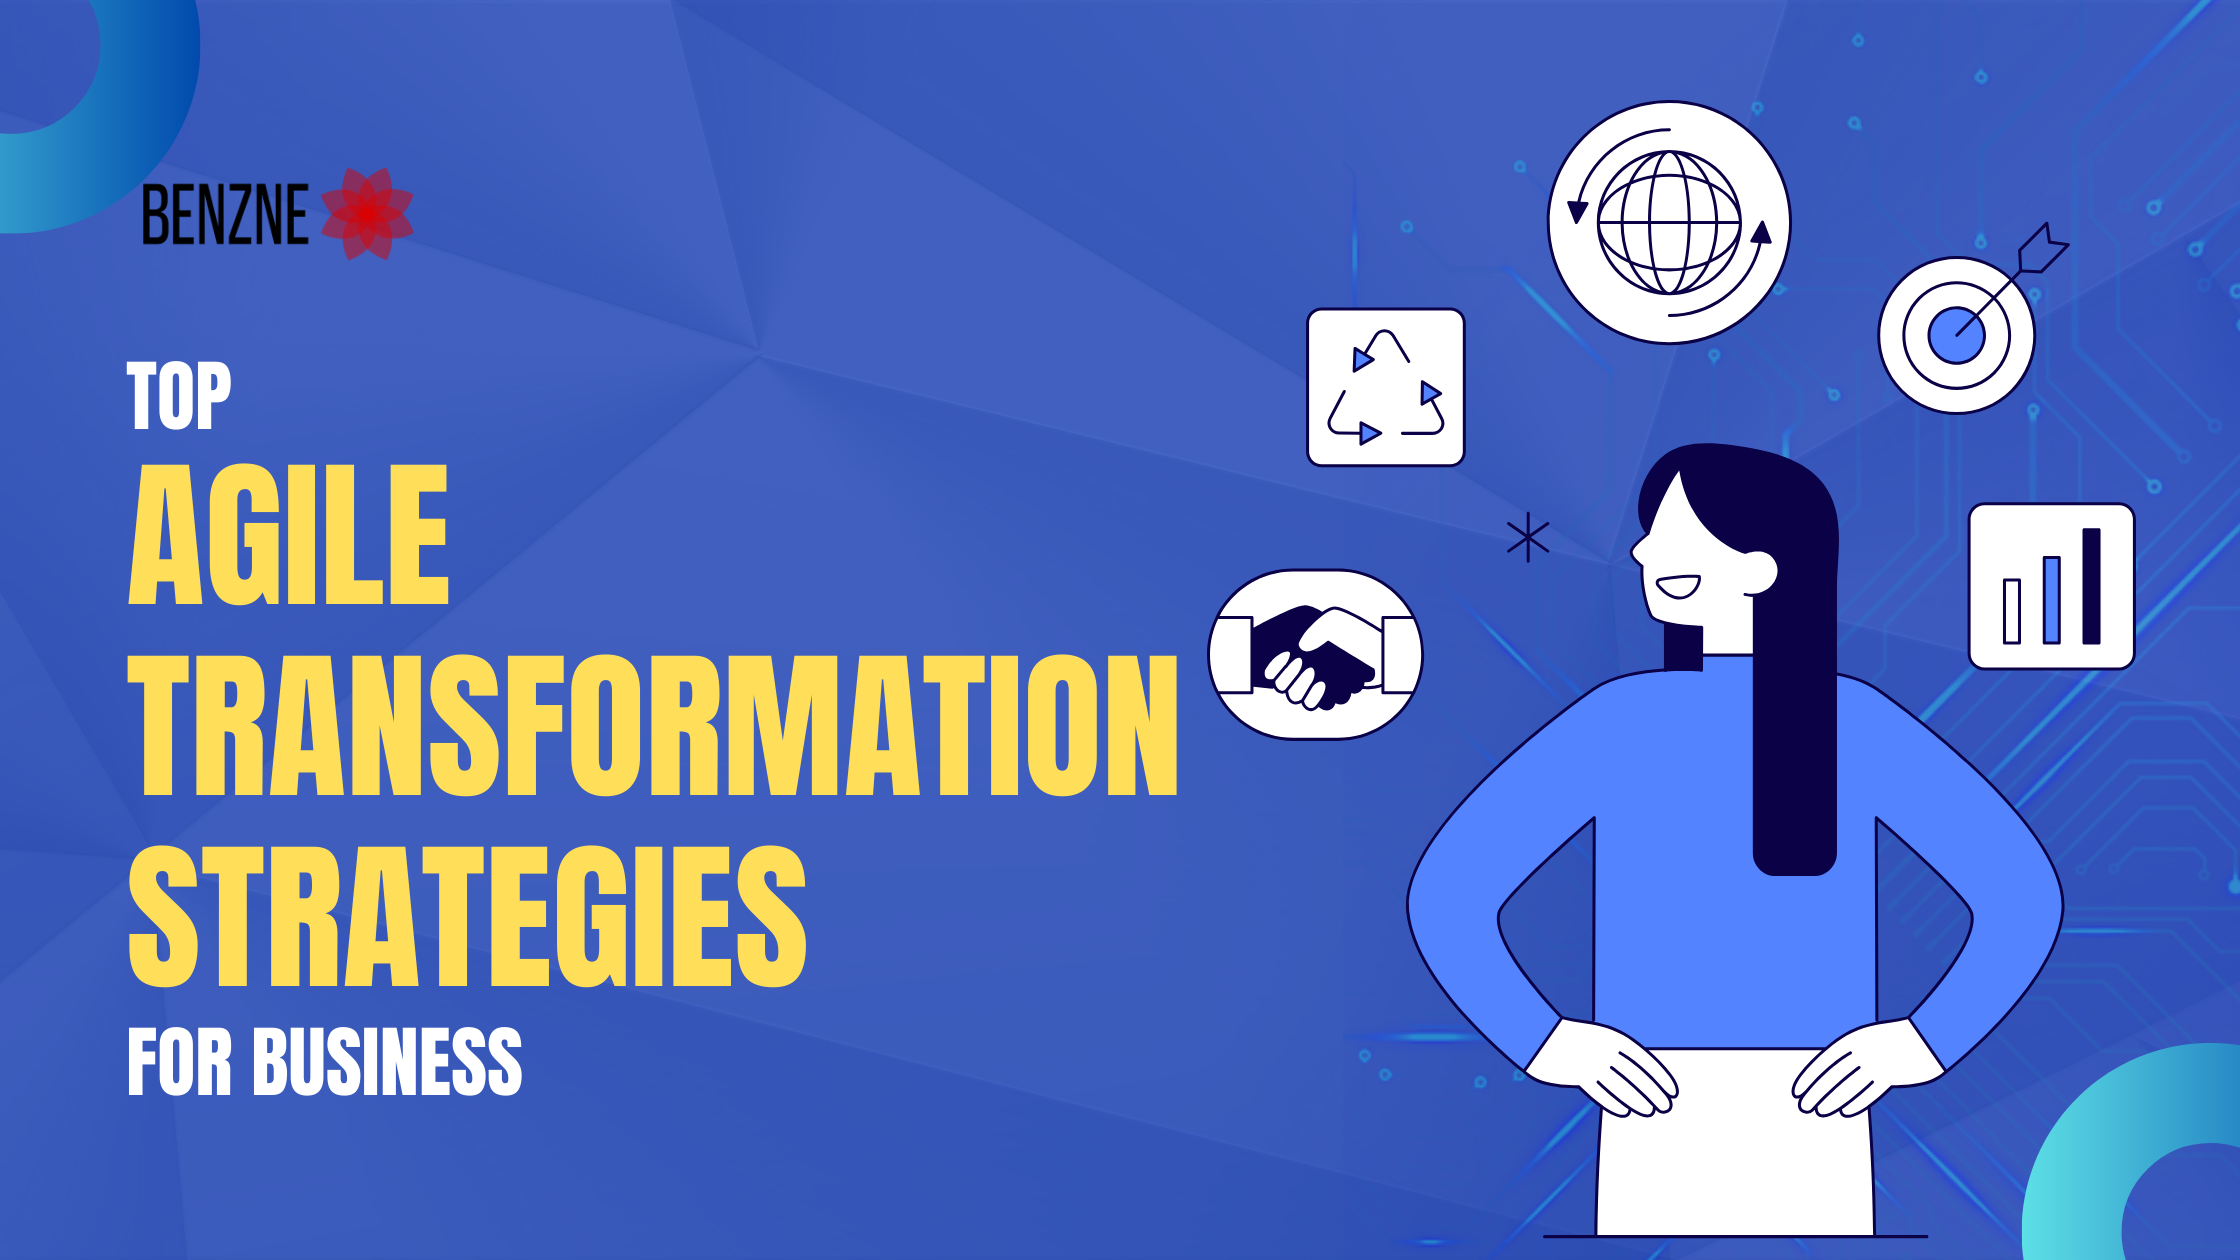 Top Agile Transformation Strategies for Business